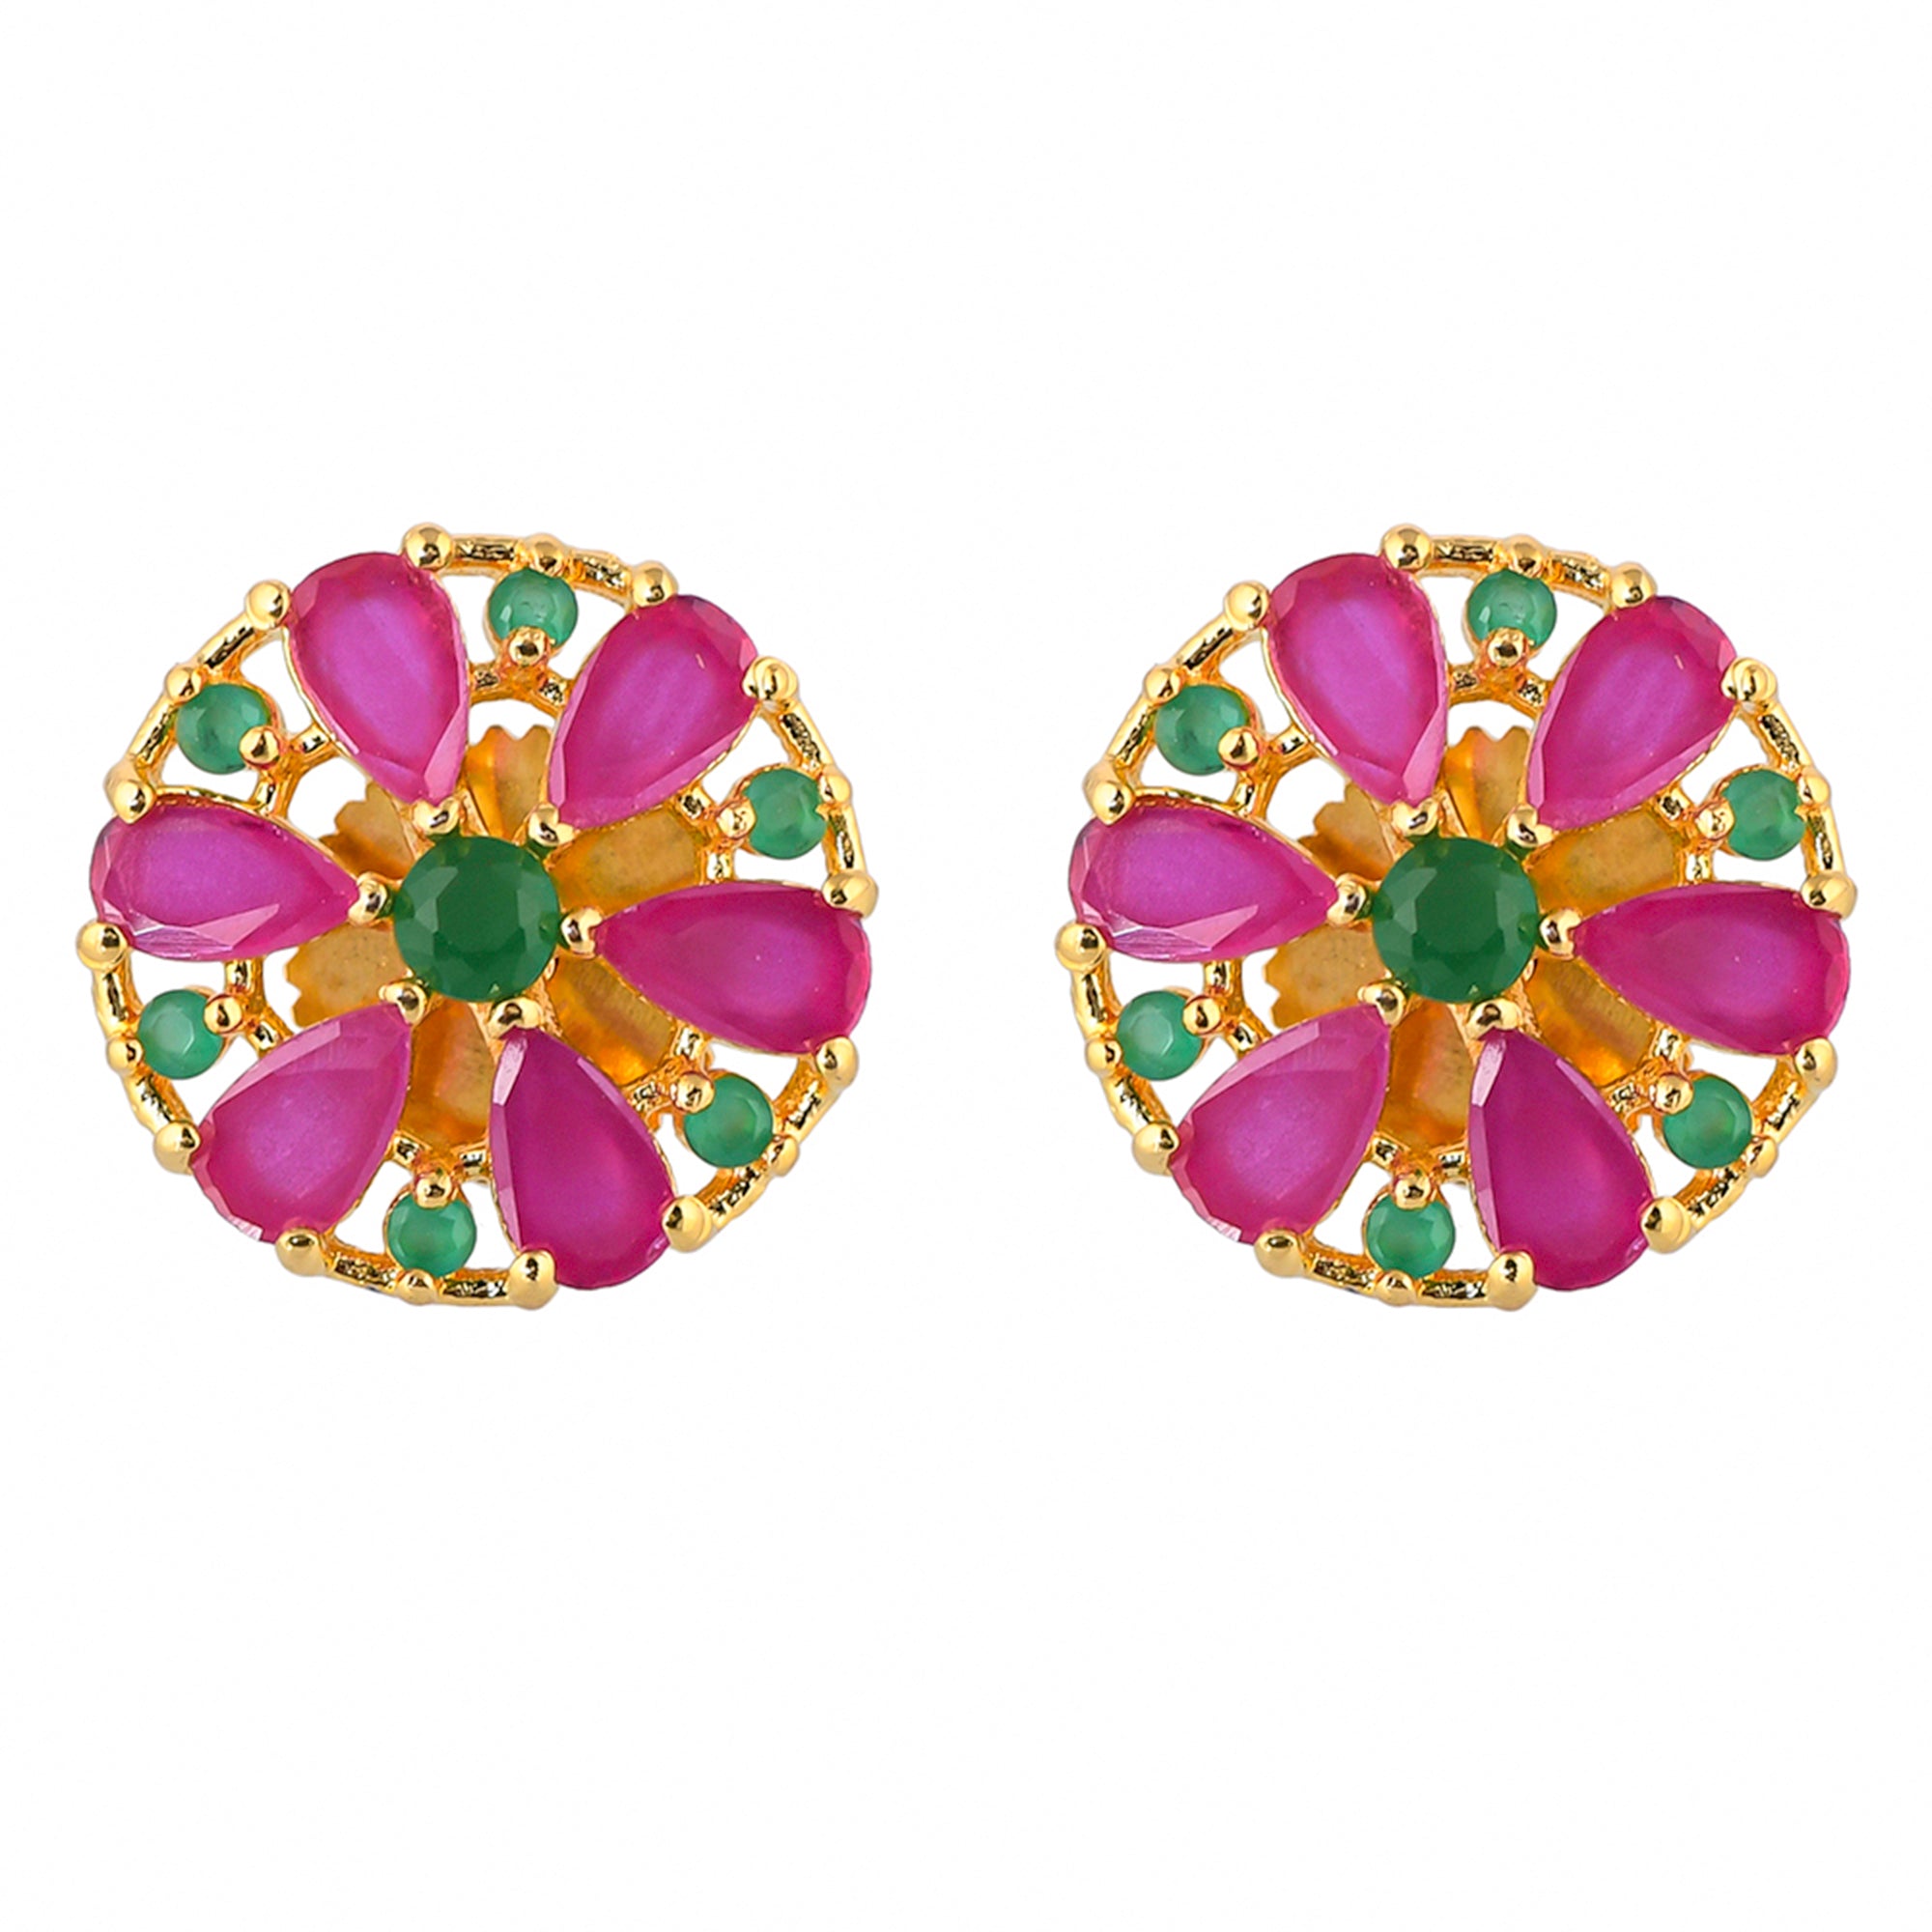 Women's Round Pink And Green Cz Gems Stud Earrings - Voylla